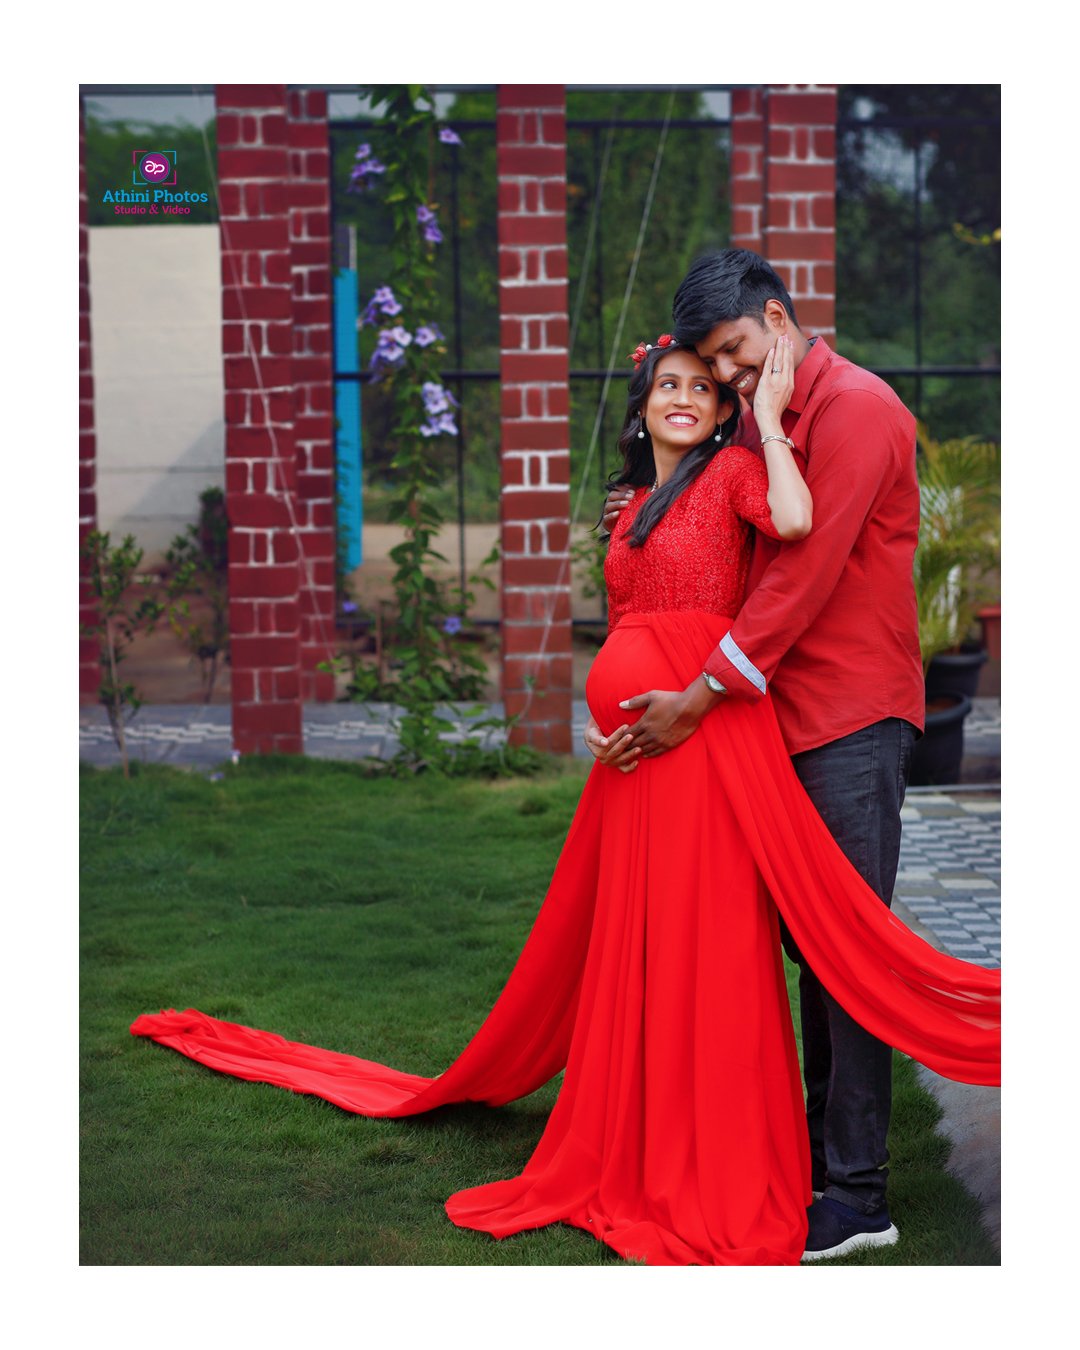 Maternity Photo Dress Ideas | Stunning Maternity Gown Photography